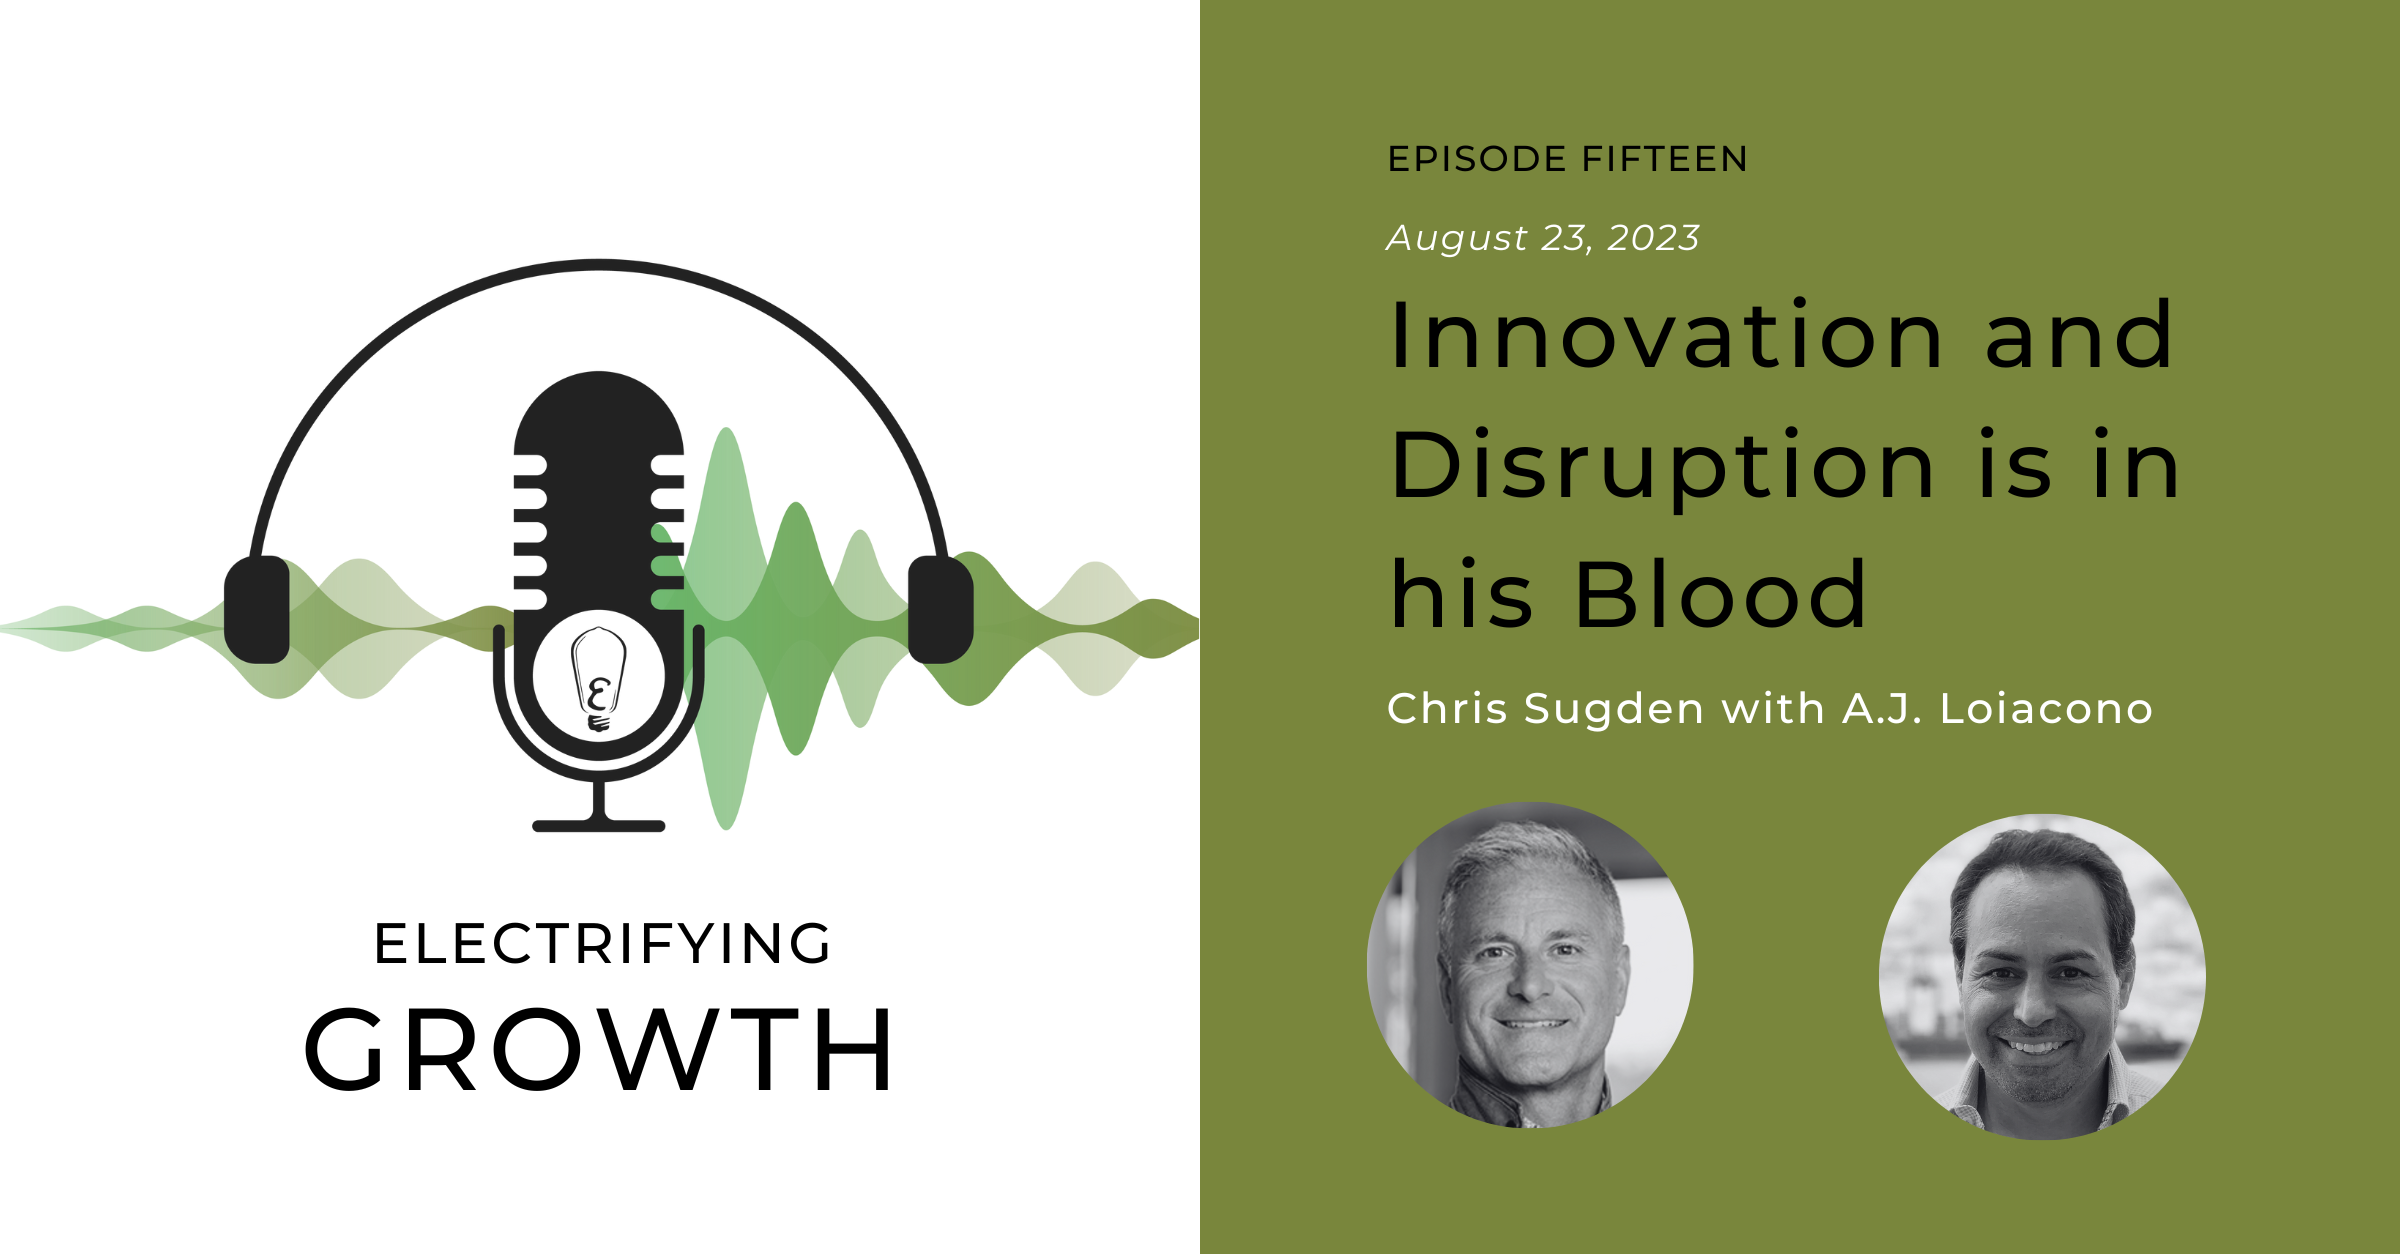 Electrifying Growth Episode 15: Innovation and Disruption is in his Blood with A.J. Loiacono